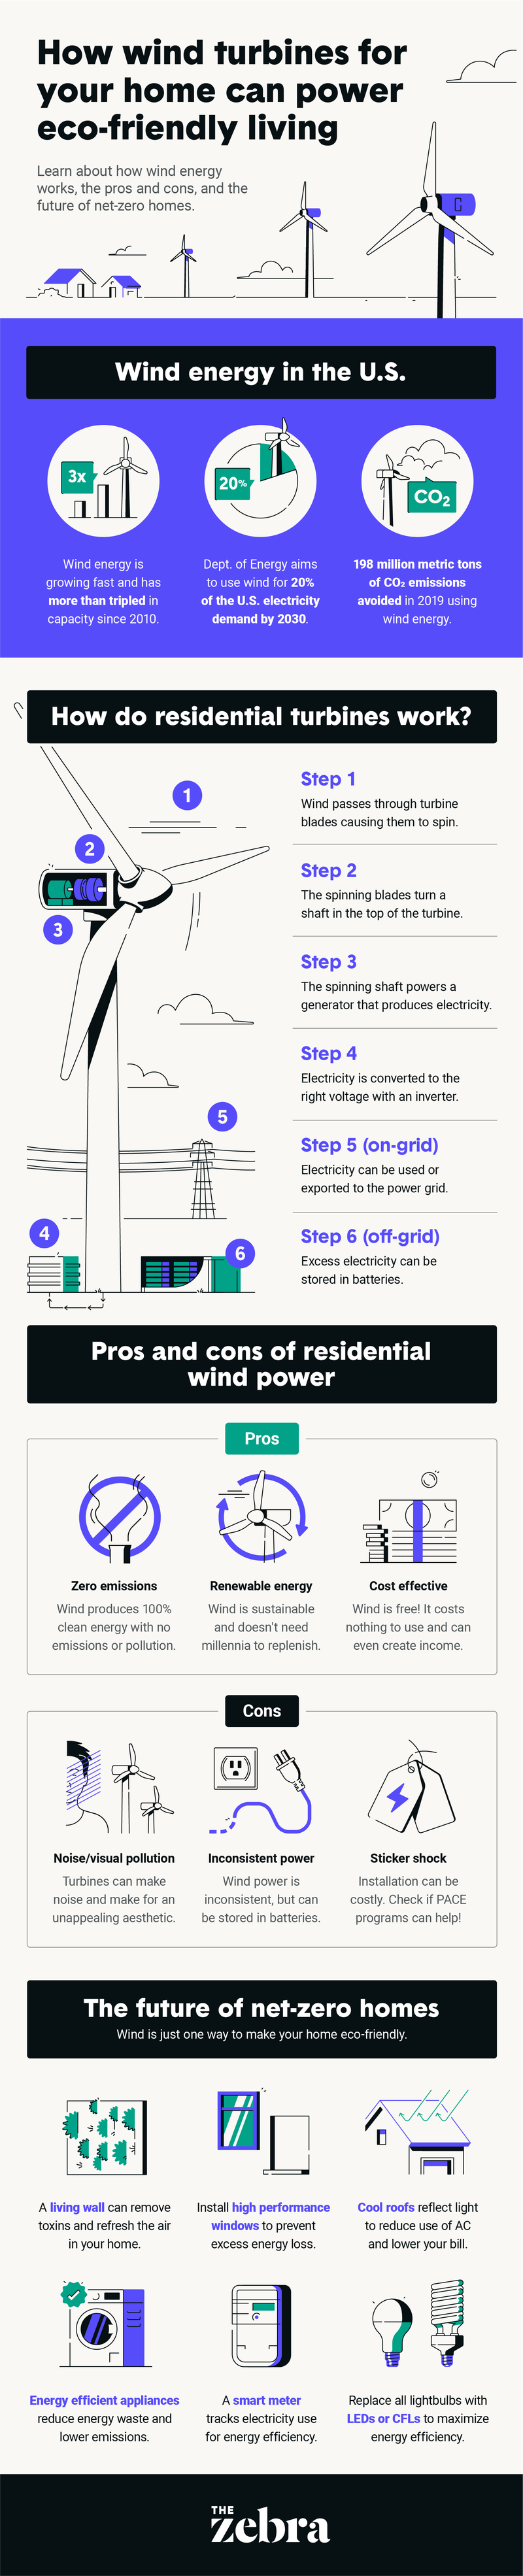 how-wind-turbines-can-power-eco-friendly-living.png